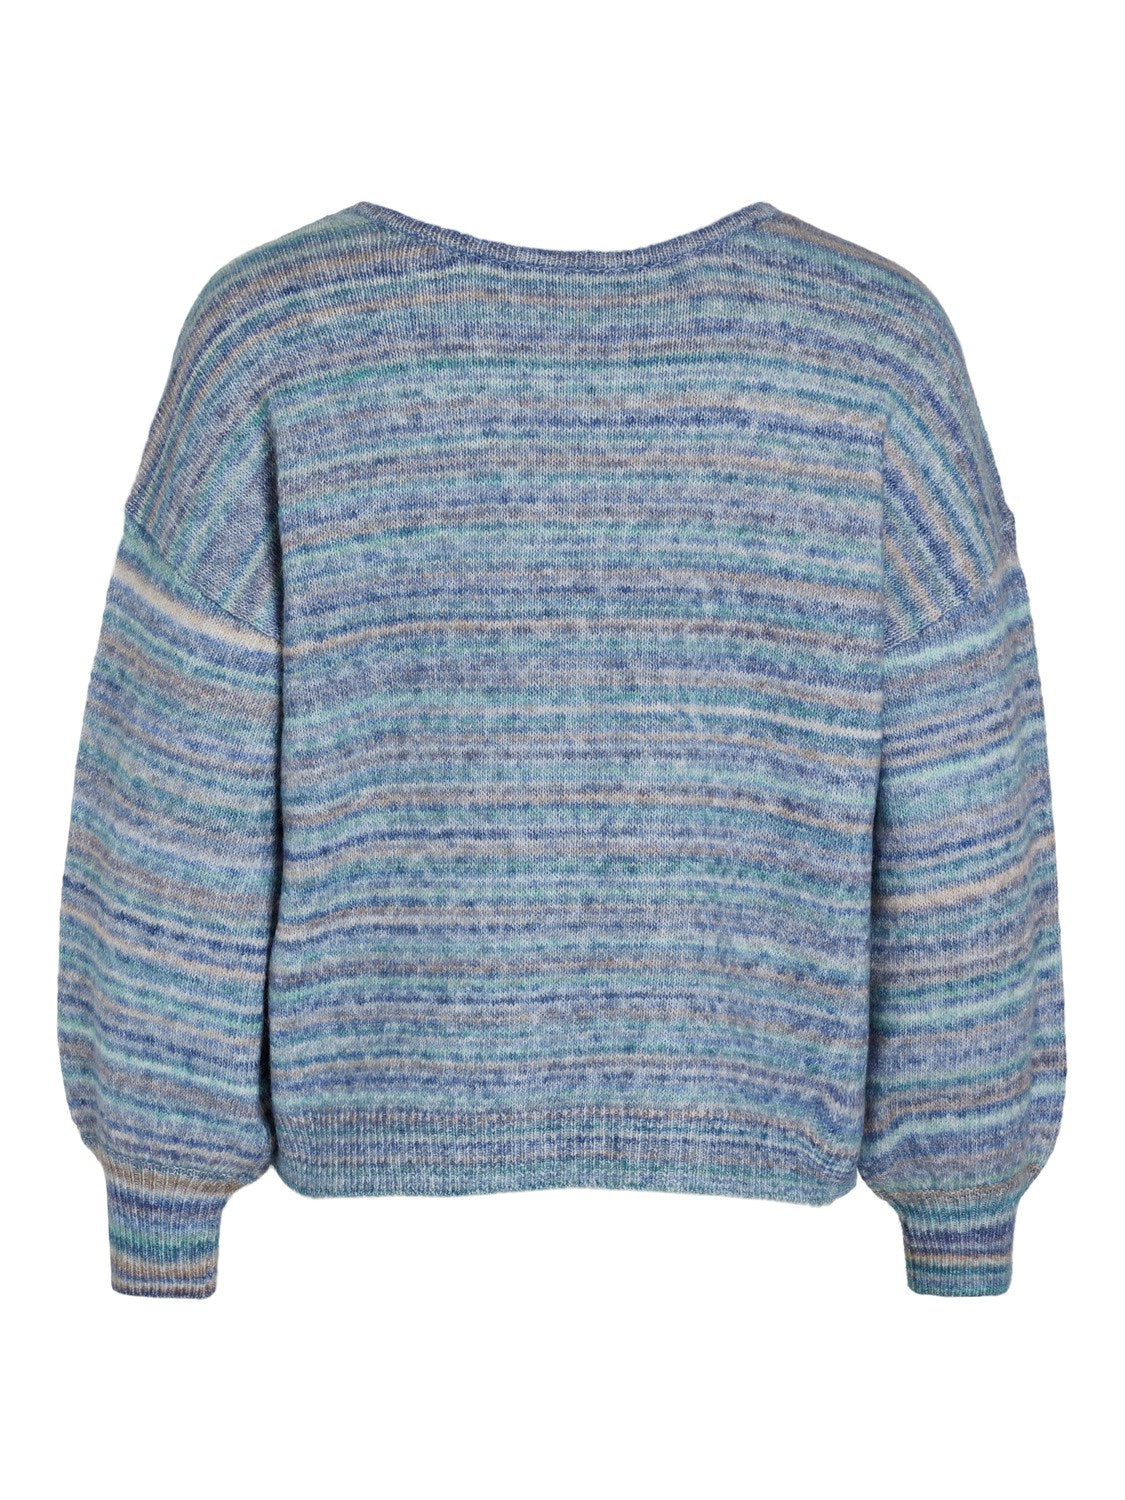 Gonia Knit / Moroccan Blue